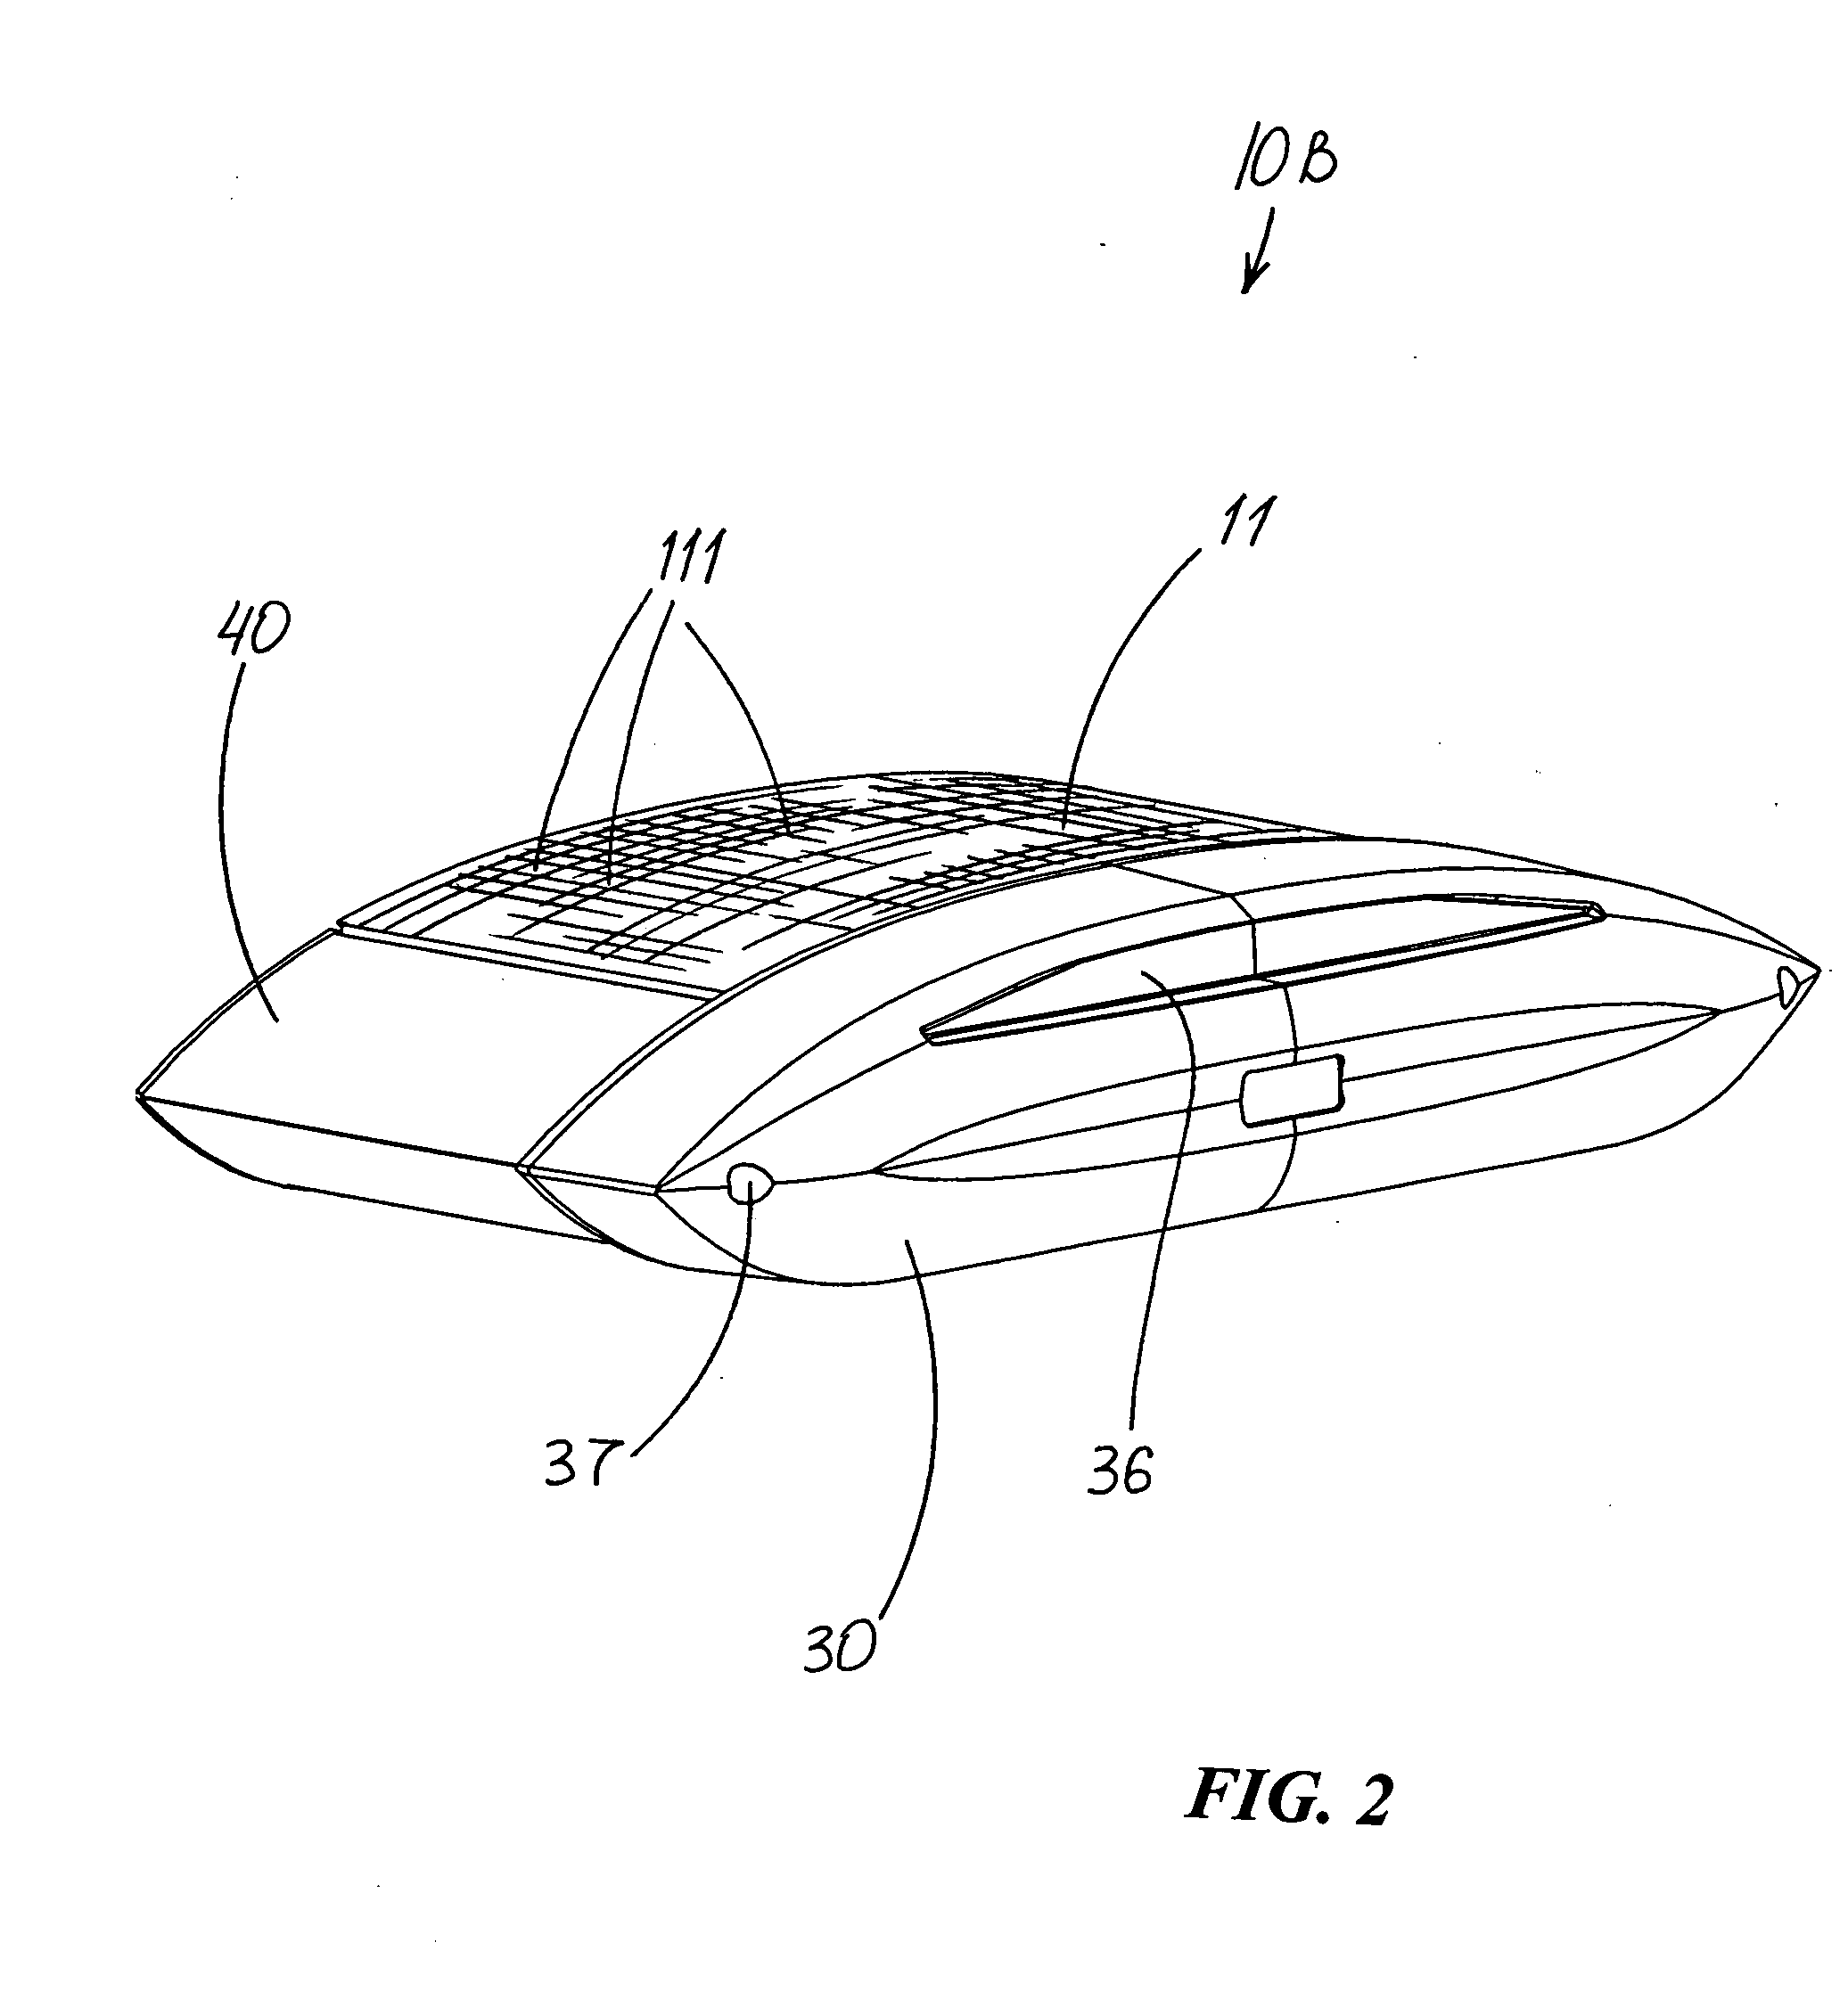 LED Light Fixture with Uninterruptible Power Supply